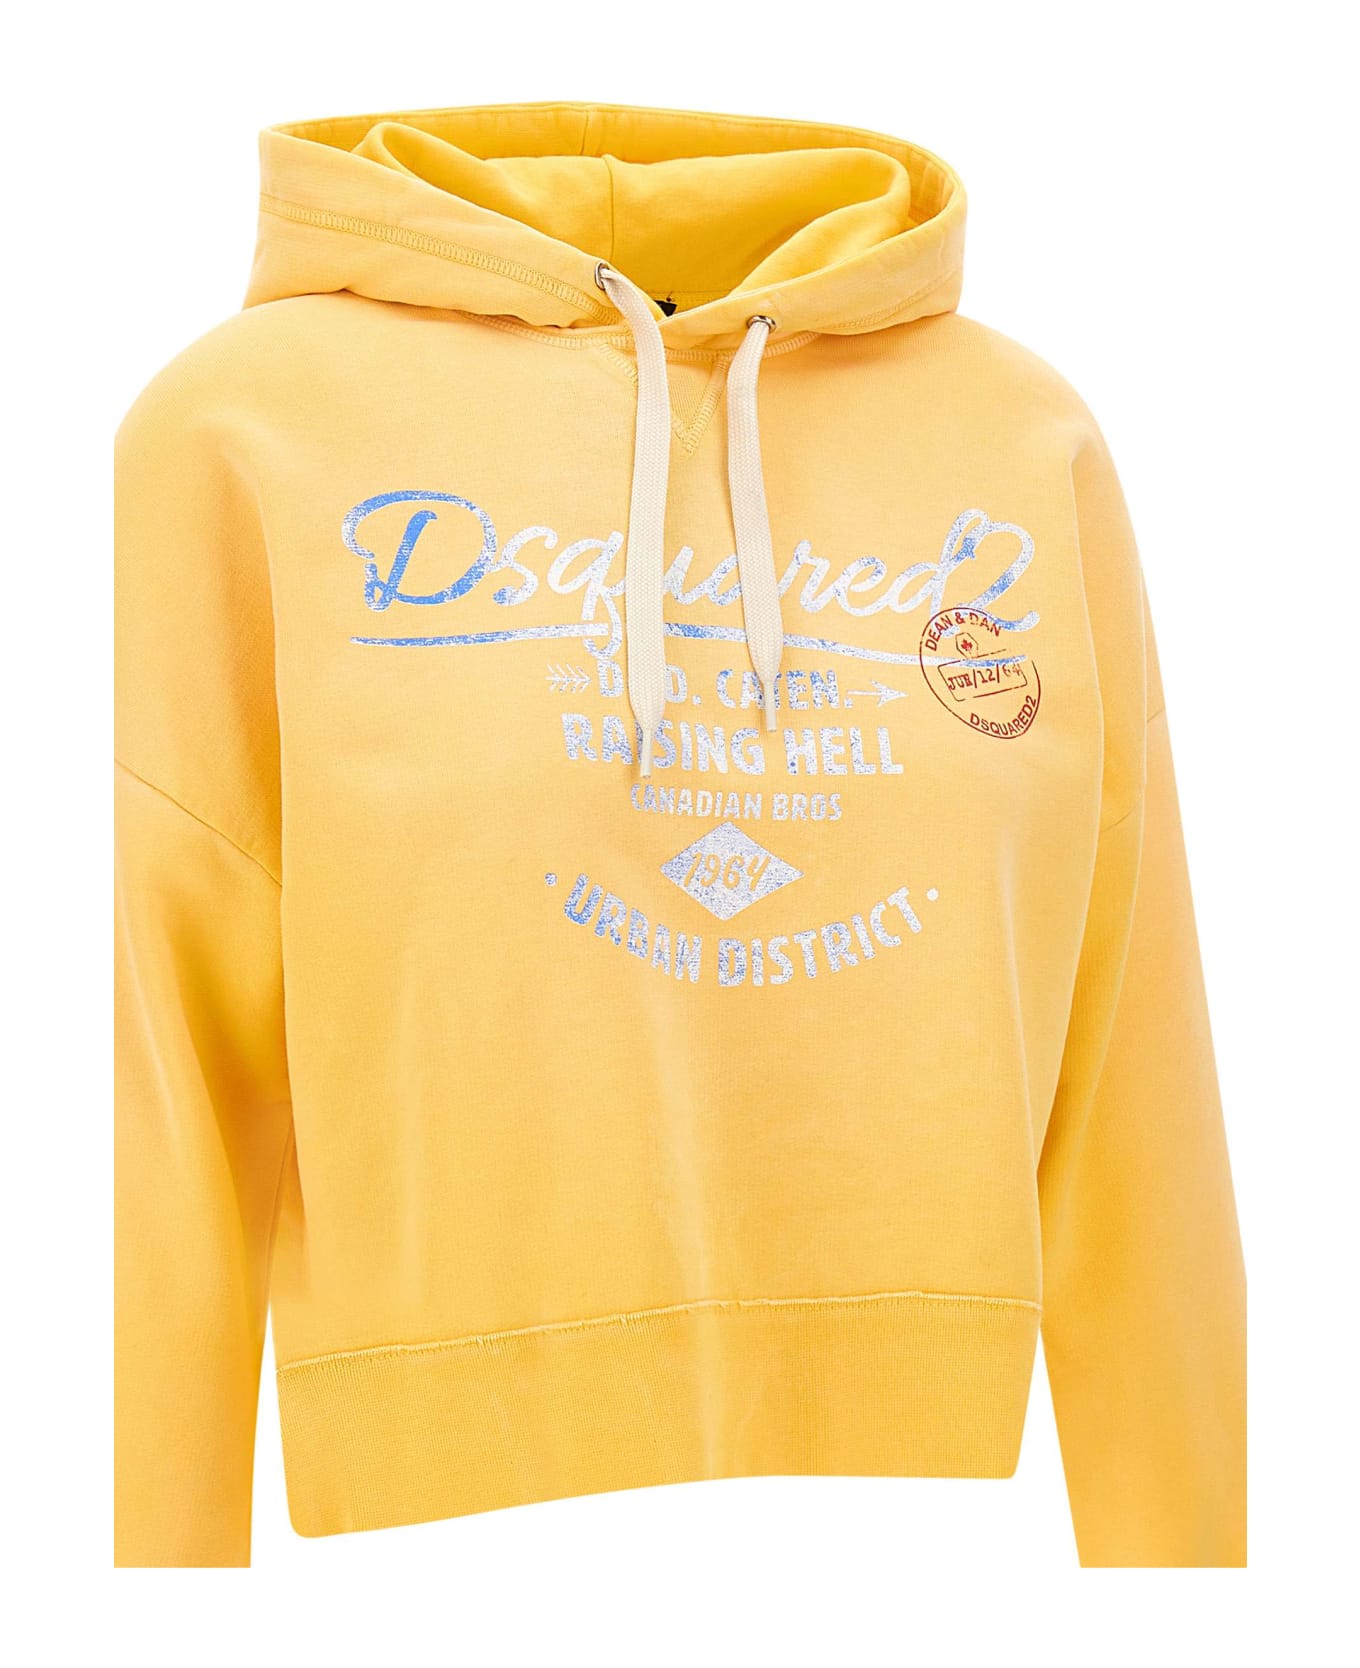 Dsquared2 'relaxed Cropped' Cotton Sweatshirt - YELLOW フリース